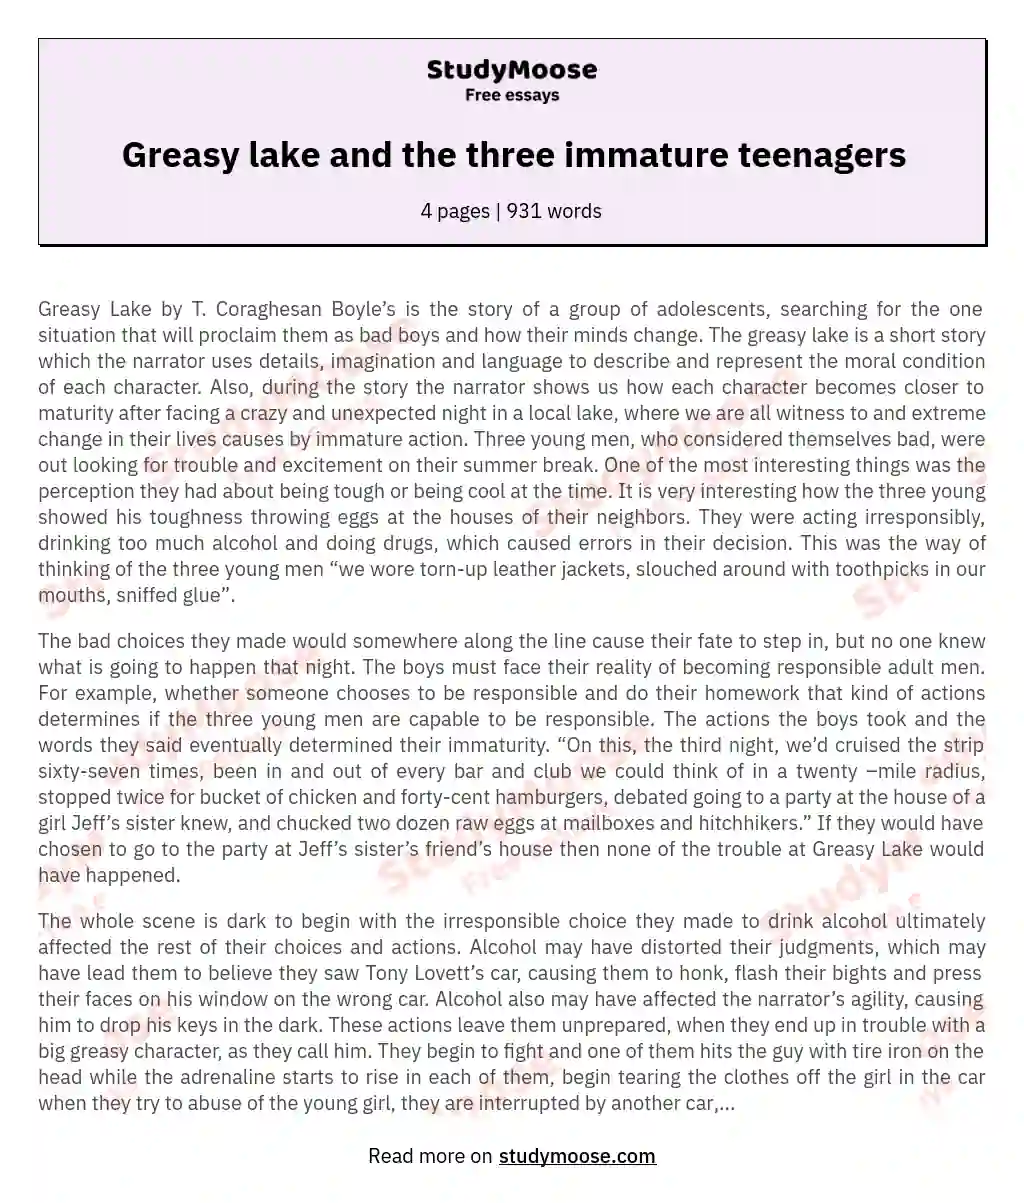 Greasy lake and the three immature teenagers essay